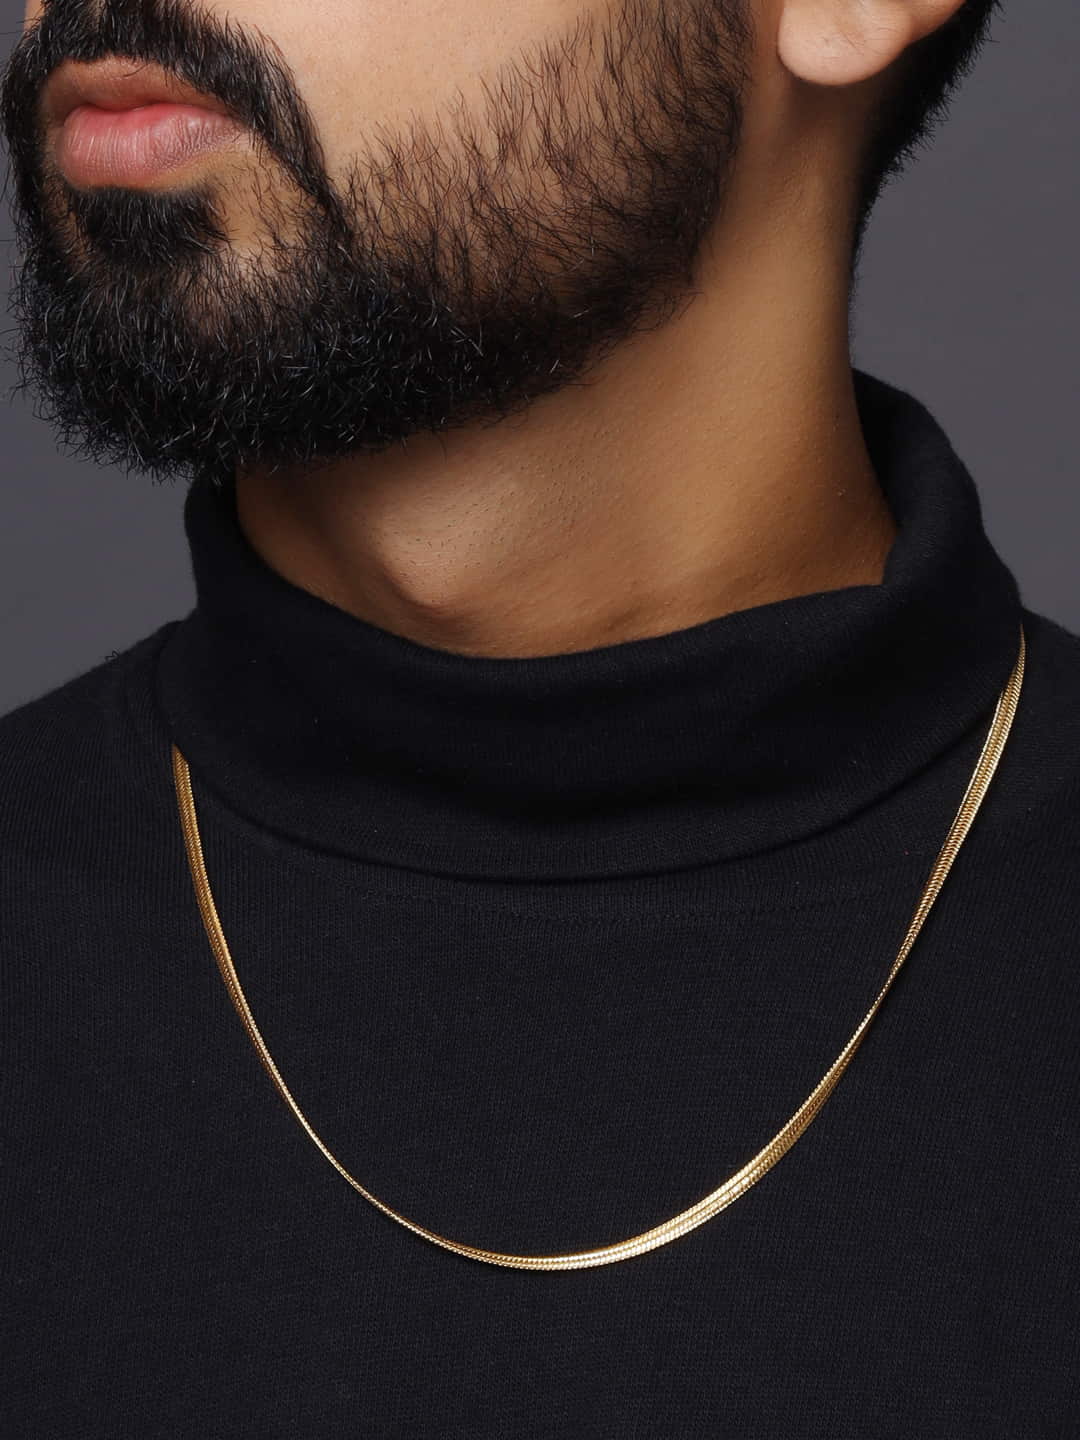 Gold Plated Long Chain For Men